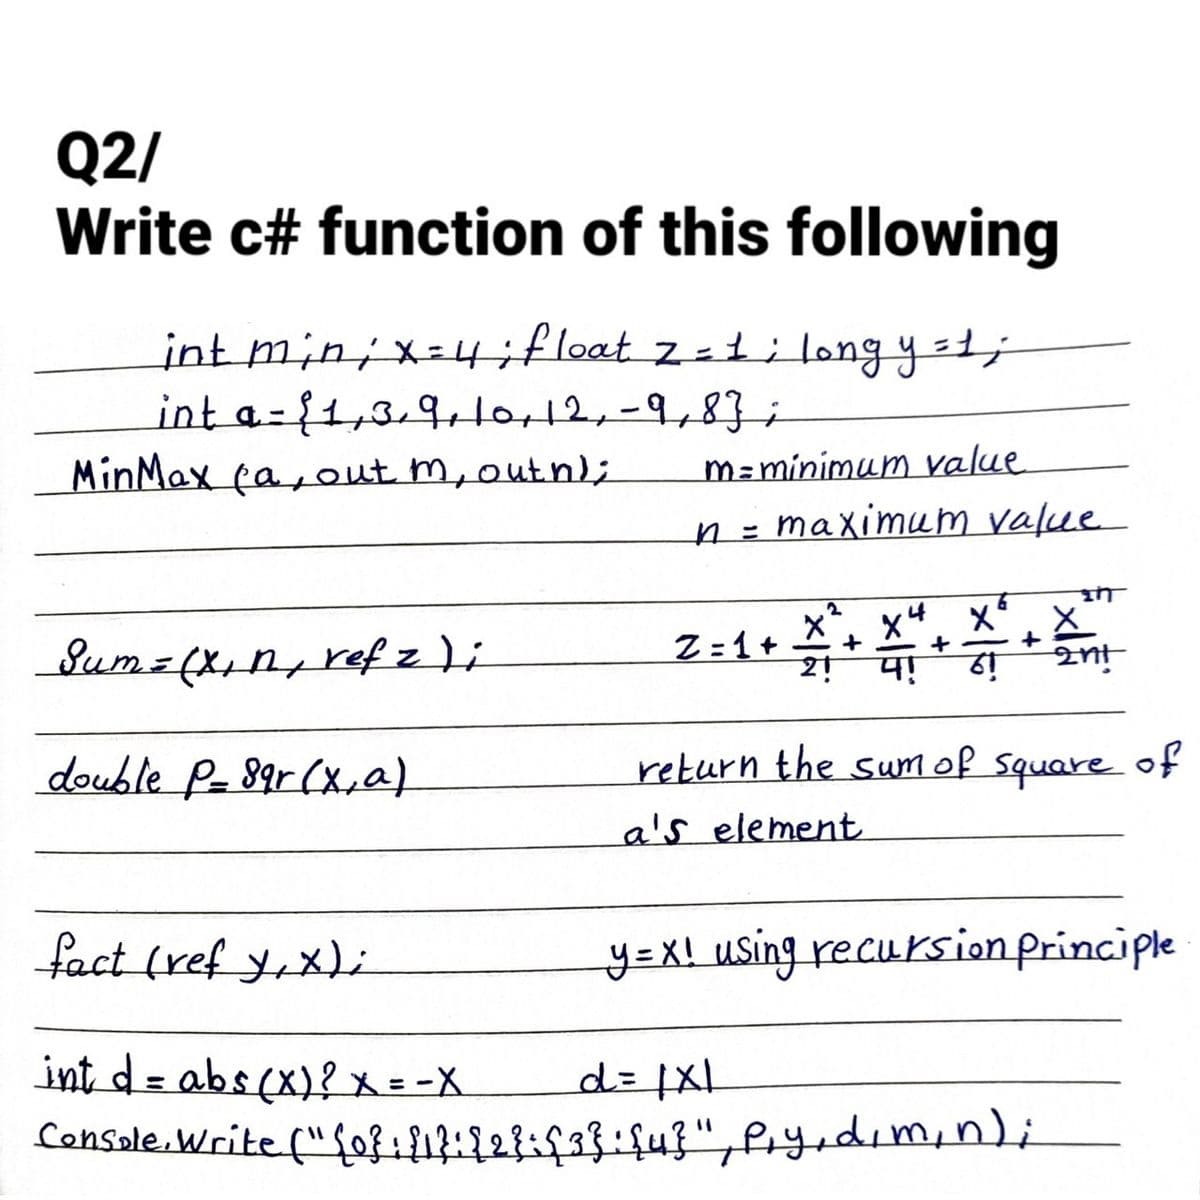 Q2/
Write c# function of this following
int min ; x = 4; float z = 1; long y = 1;
int a = {1,3,9, 10, 12, -9,83 ;
-
MinMax (a, out m, outh);
Sum = (x₁n, ref zi
double P-89r (x, a)
m=minimum value
n = maximum value
Z=1+ X ²4
+
2!
4!
+
6
X² X
+
61
2nt
return the sum of square of
a's element
fact (ref y,x);
int d = abs(x)? x = -X
d = |x|
Console.Write ("{0}: {1}: {2}={3}: {4}", py, d, m, n);
y=x! using recursion principle